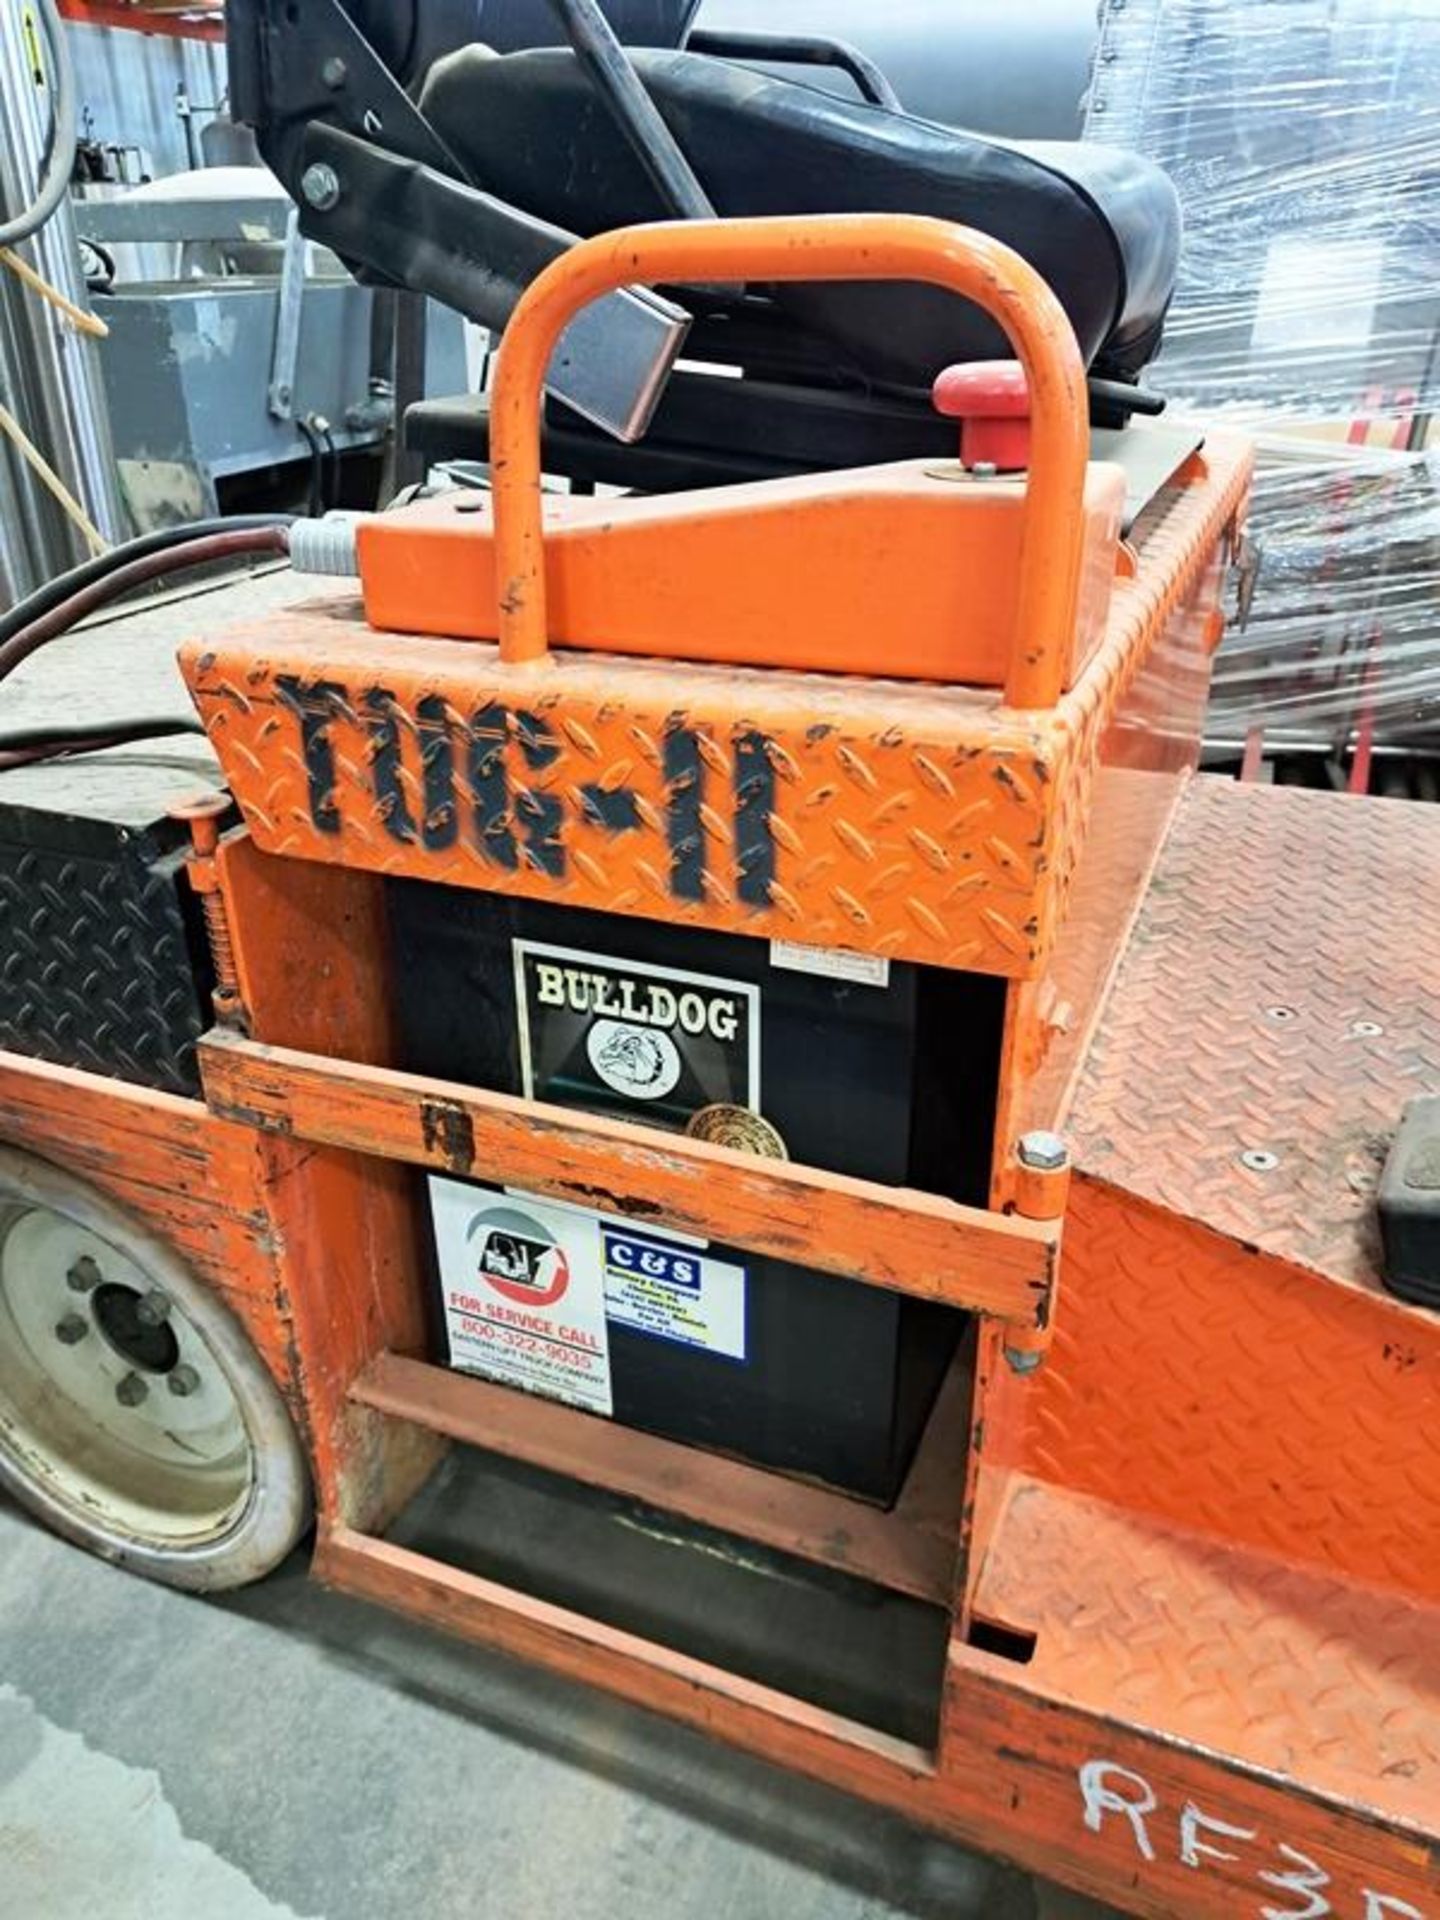 Motrec Electric Service Vehicle, 36" wide X 65" long, 36 volt battery (Required Loading Fee: $25.00) - Image 4 of 4